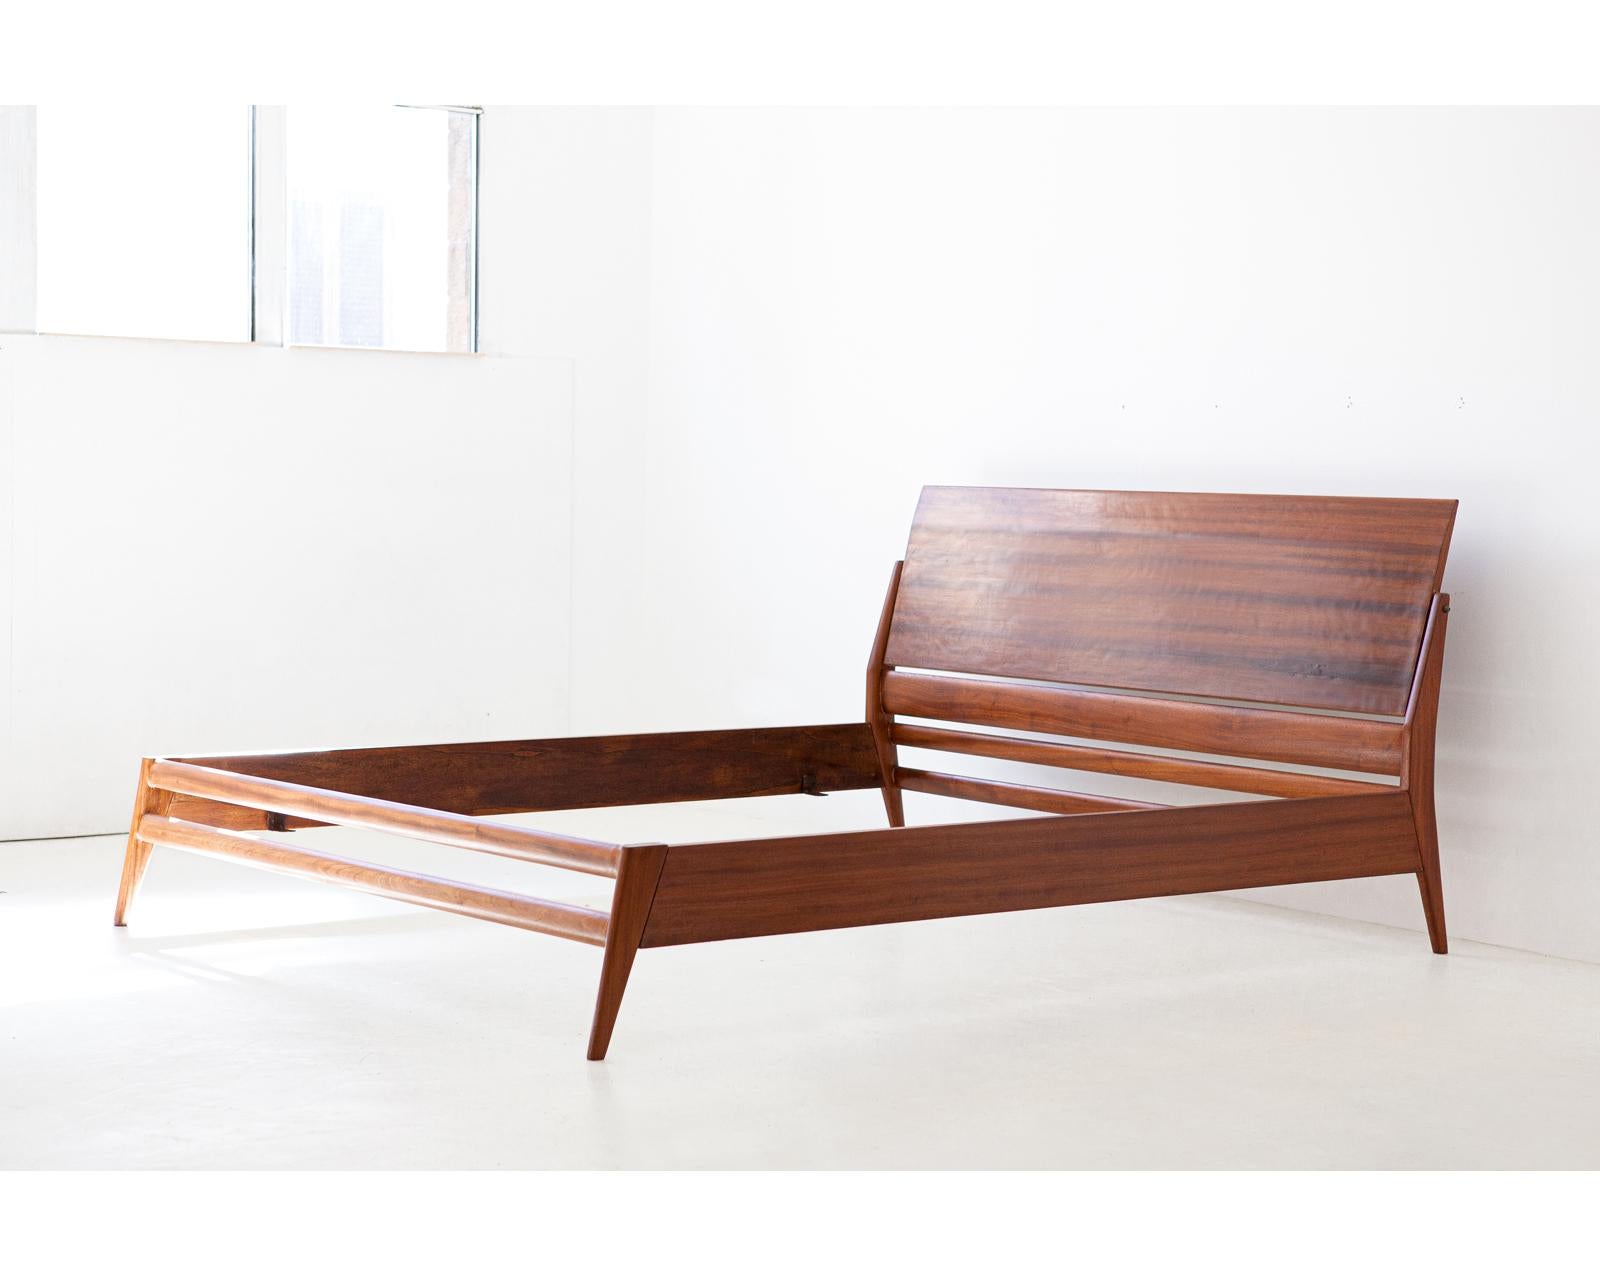 A midcentury modern double bed frame , designed and manufactured in Italy by Silvio Cavatorta Roma during 1950s.

Elegant with modern lines.

Fully restored

Measures:
Internal: 166cm width x 192cm depth.